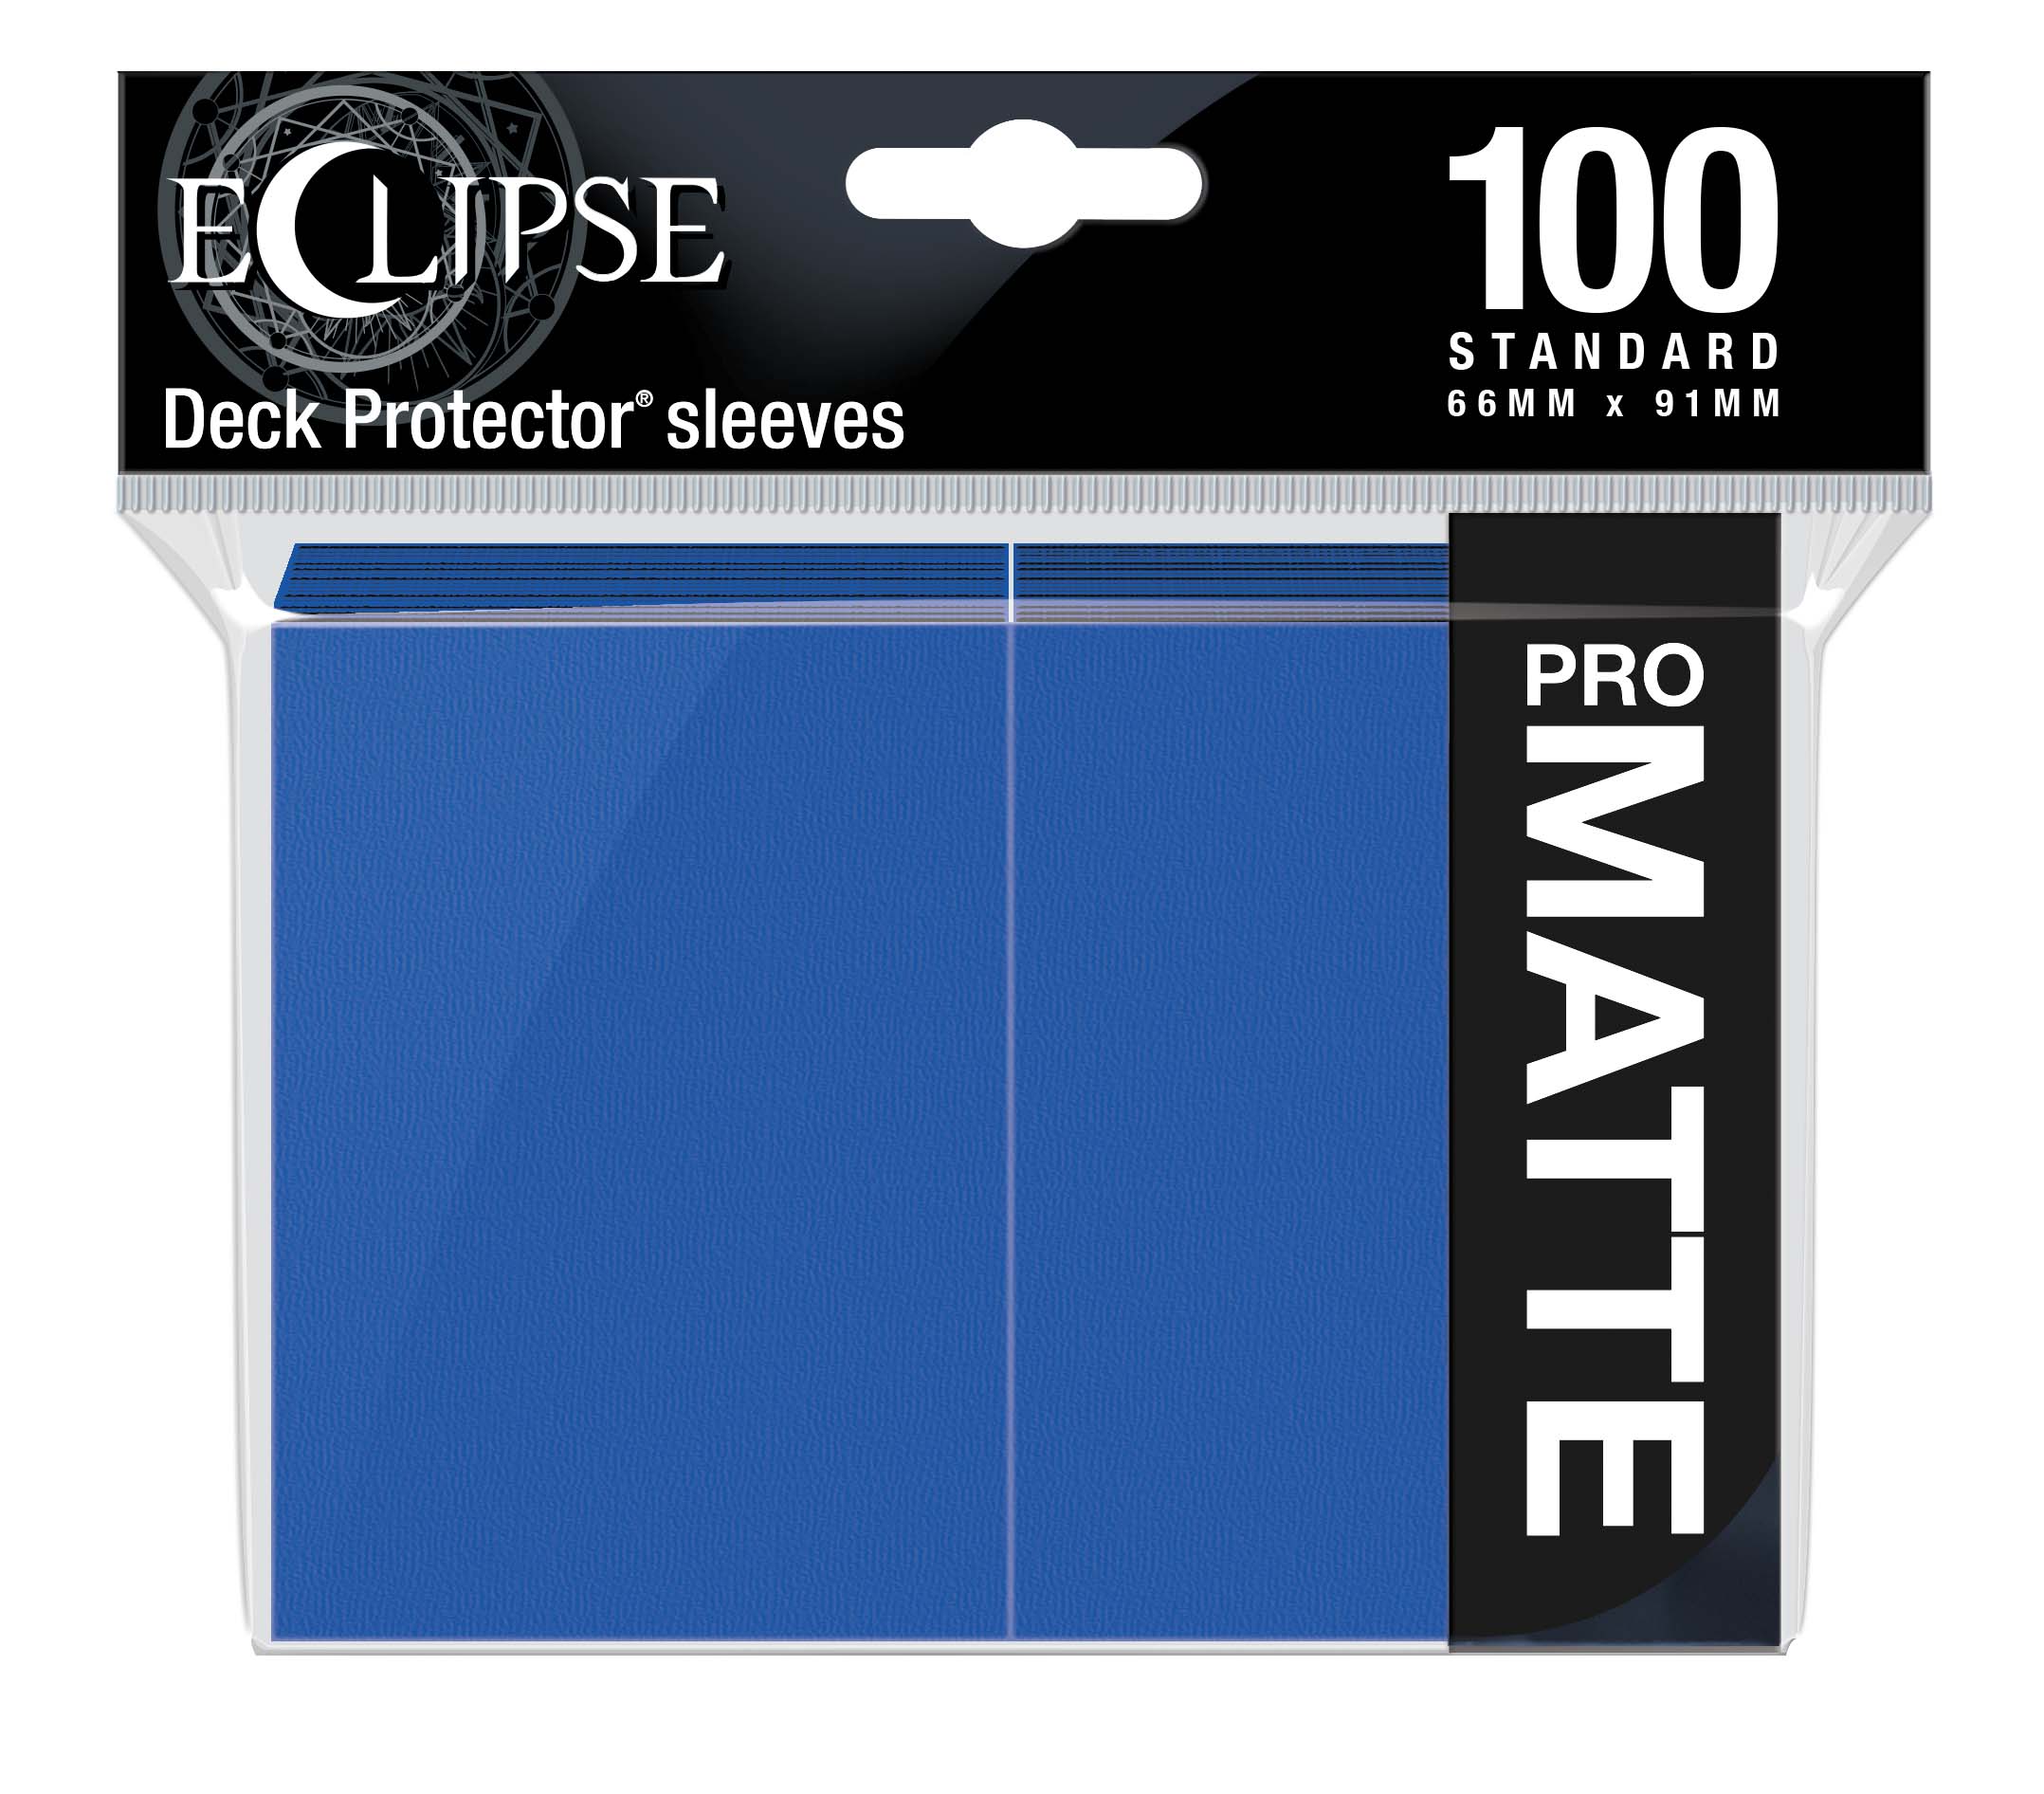 Ultra Pro: Eclipse Matte Standard Sleeves Pacific Blue (100)